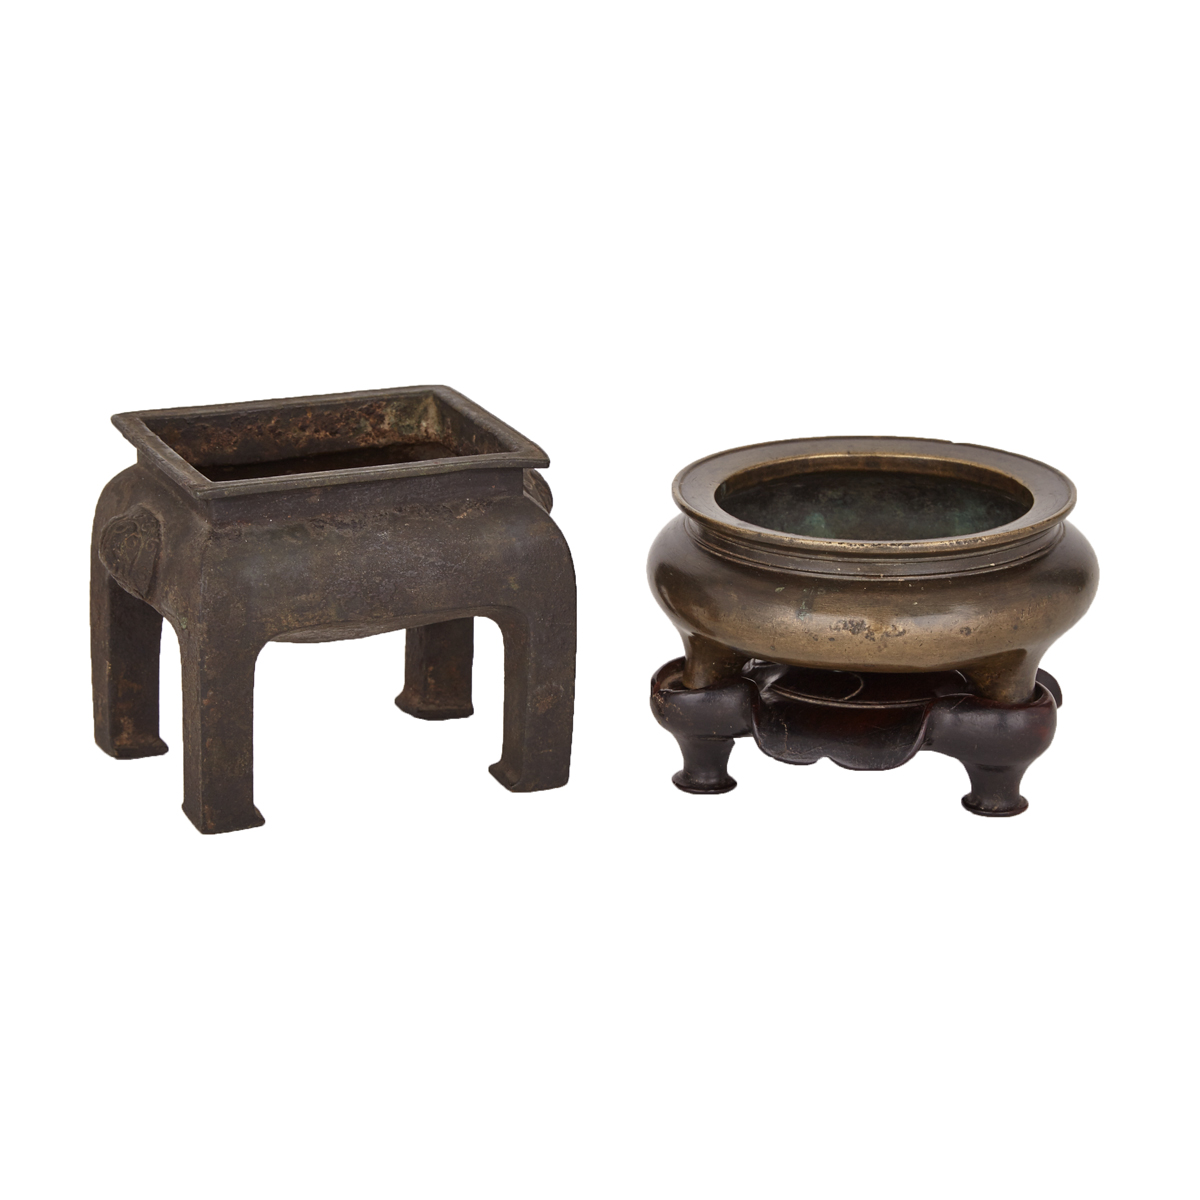 Bronze Censer with Carved Stand together with Four-Footed Bronze Censer